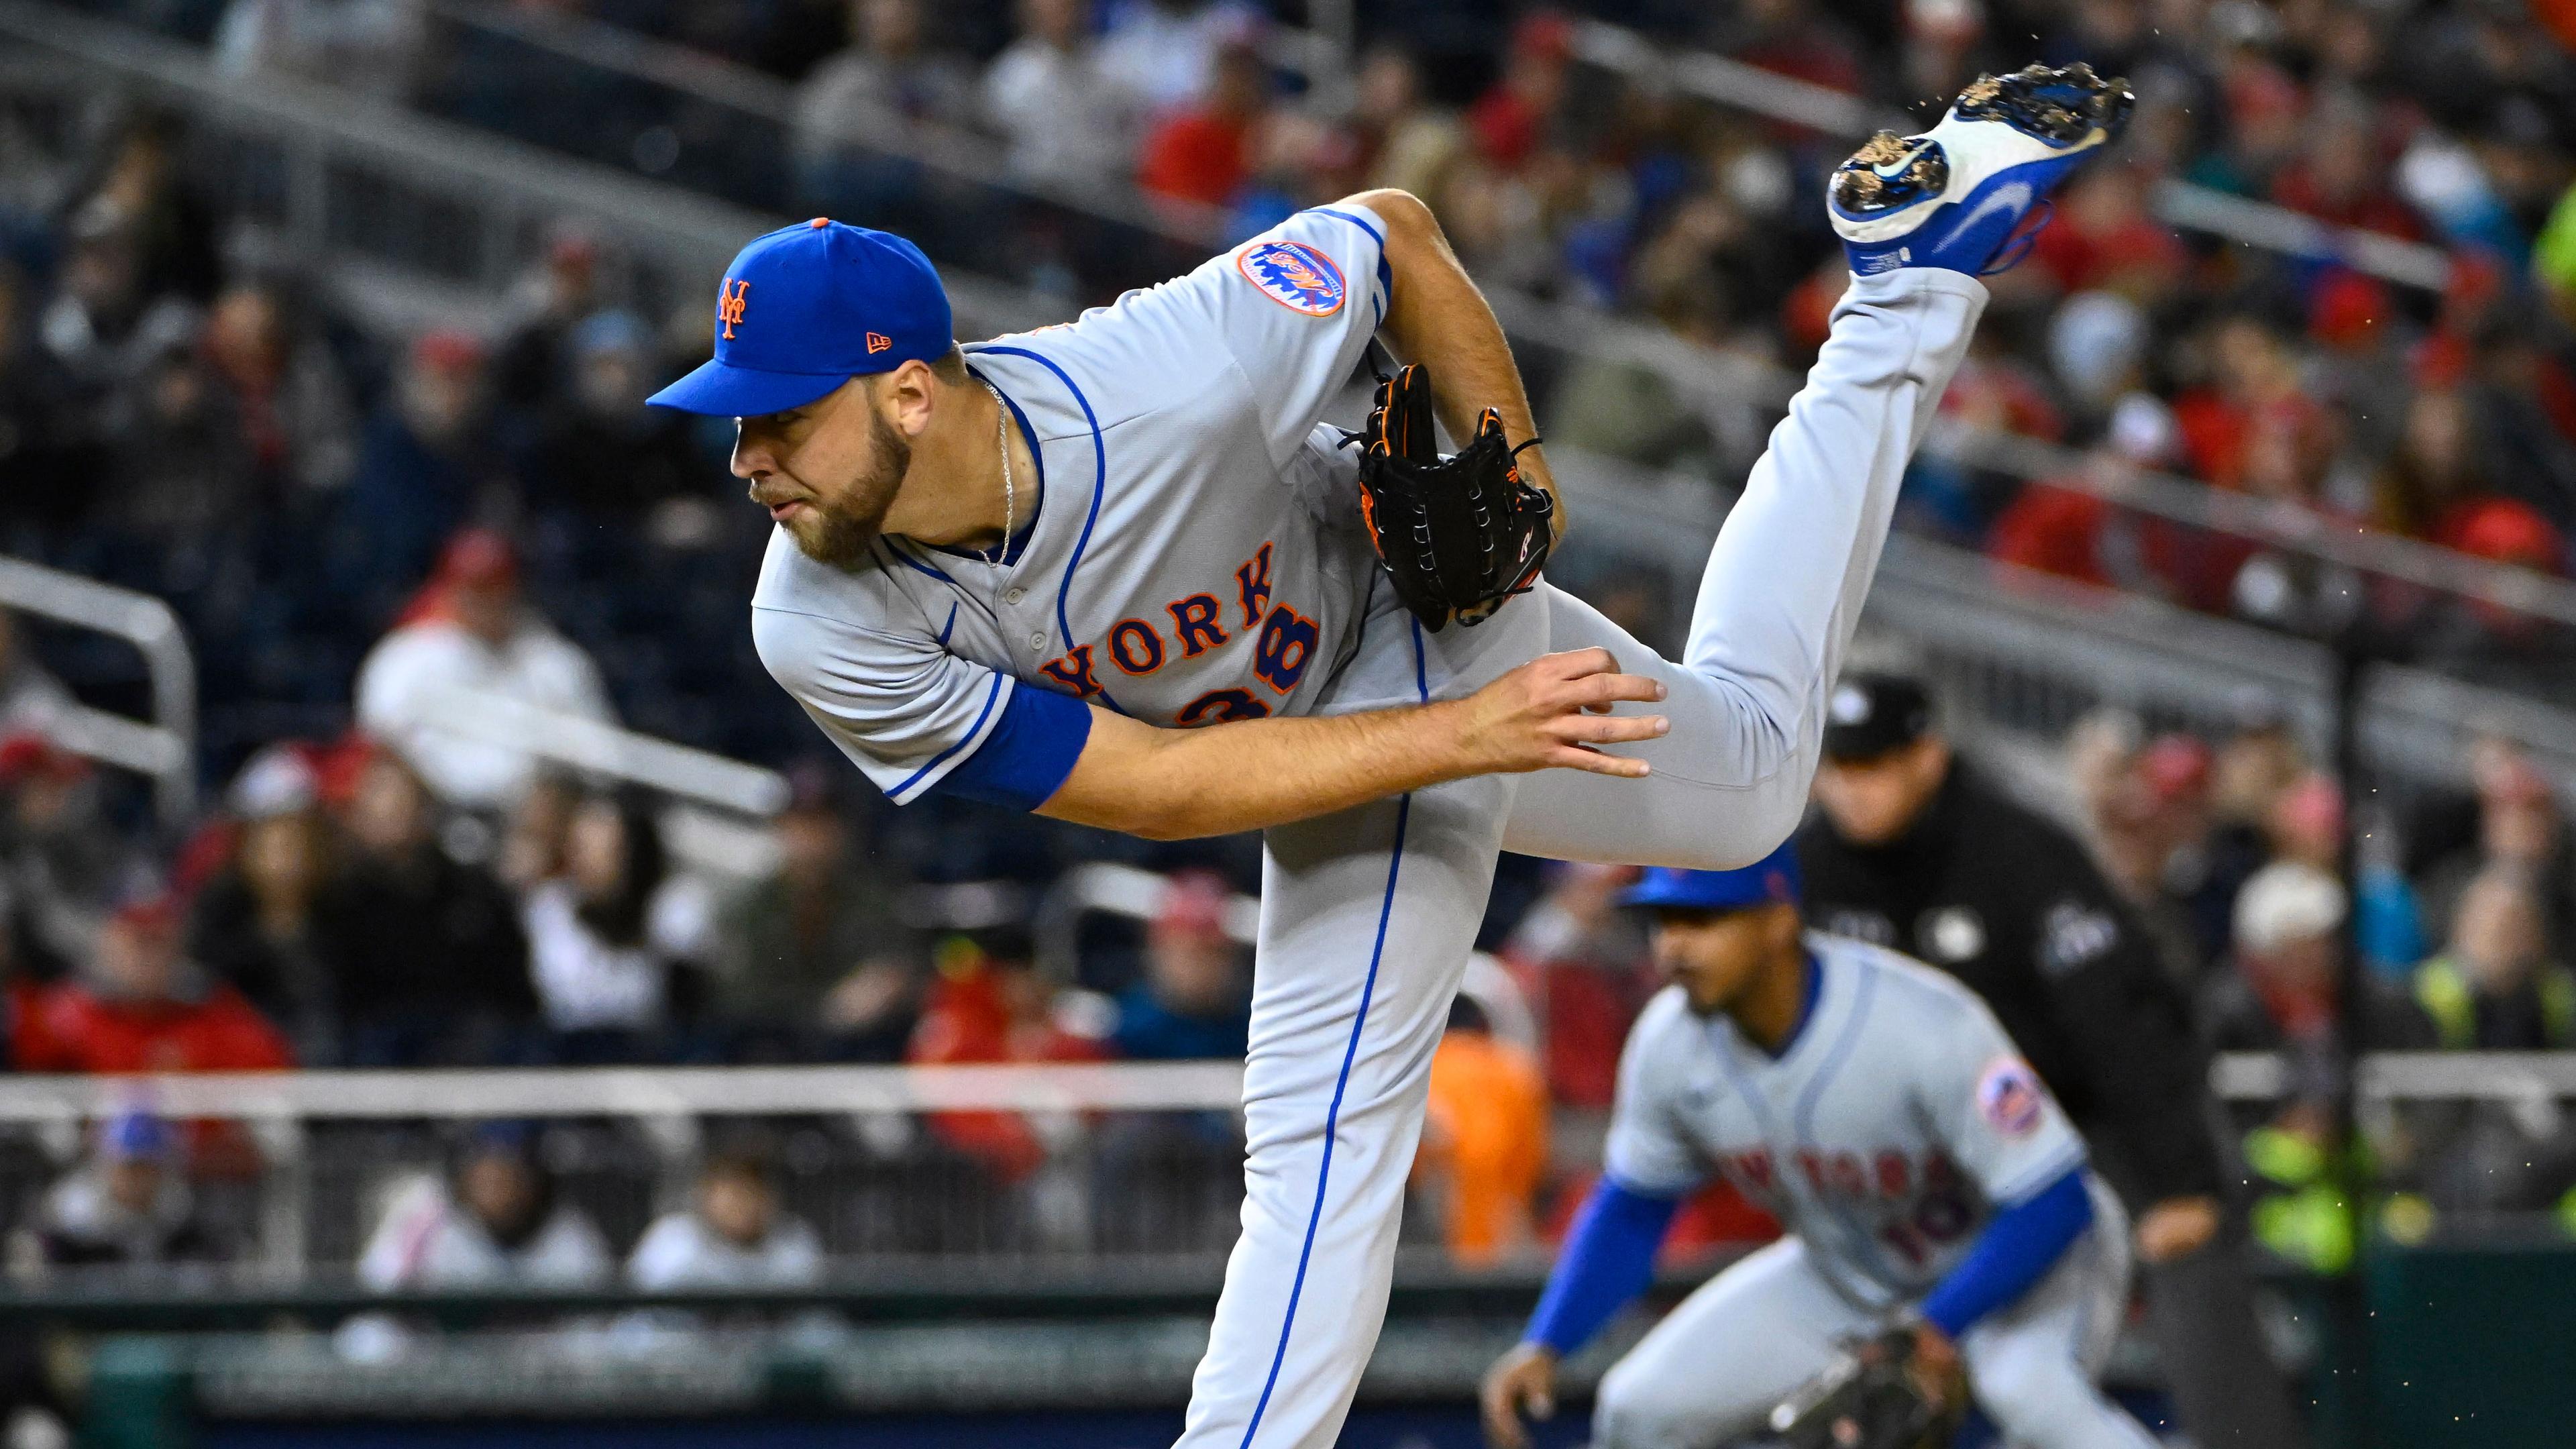 Apr 7, 2022; Washington, District of Columbia, USA; New York Mets starting pitcher Tylor Megill (38) throws a pitch against the Washington Nationals during the first inning at Nationals Park. / Brad Mills-USA TODAY Sports